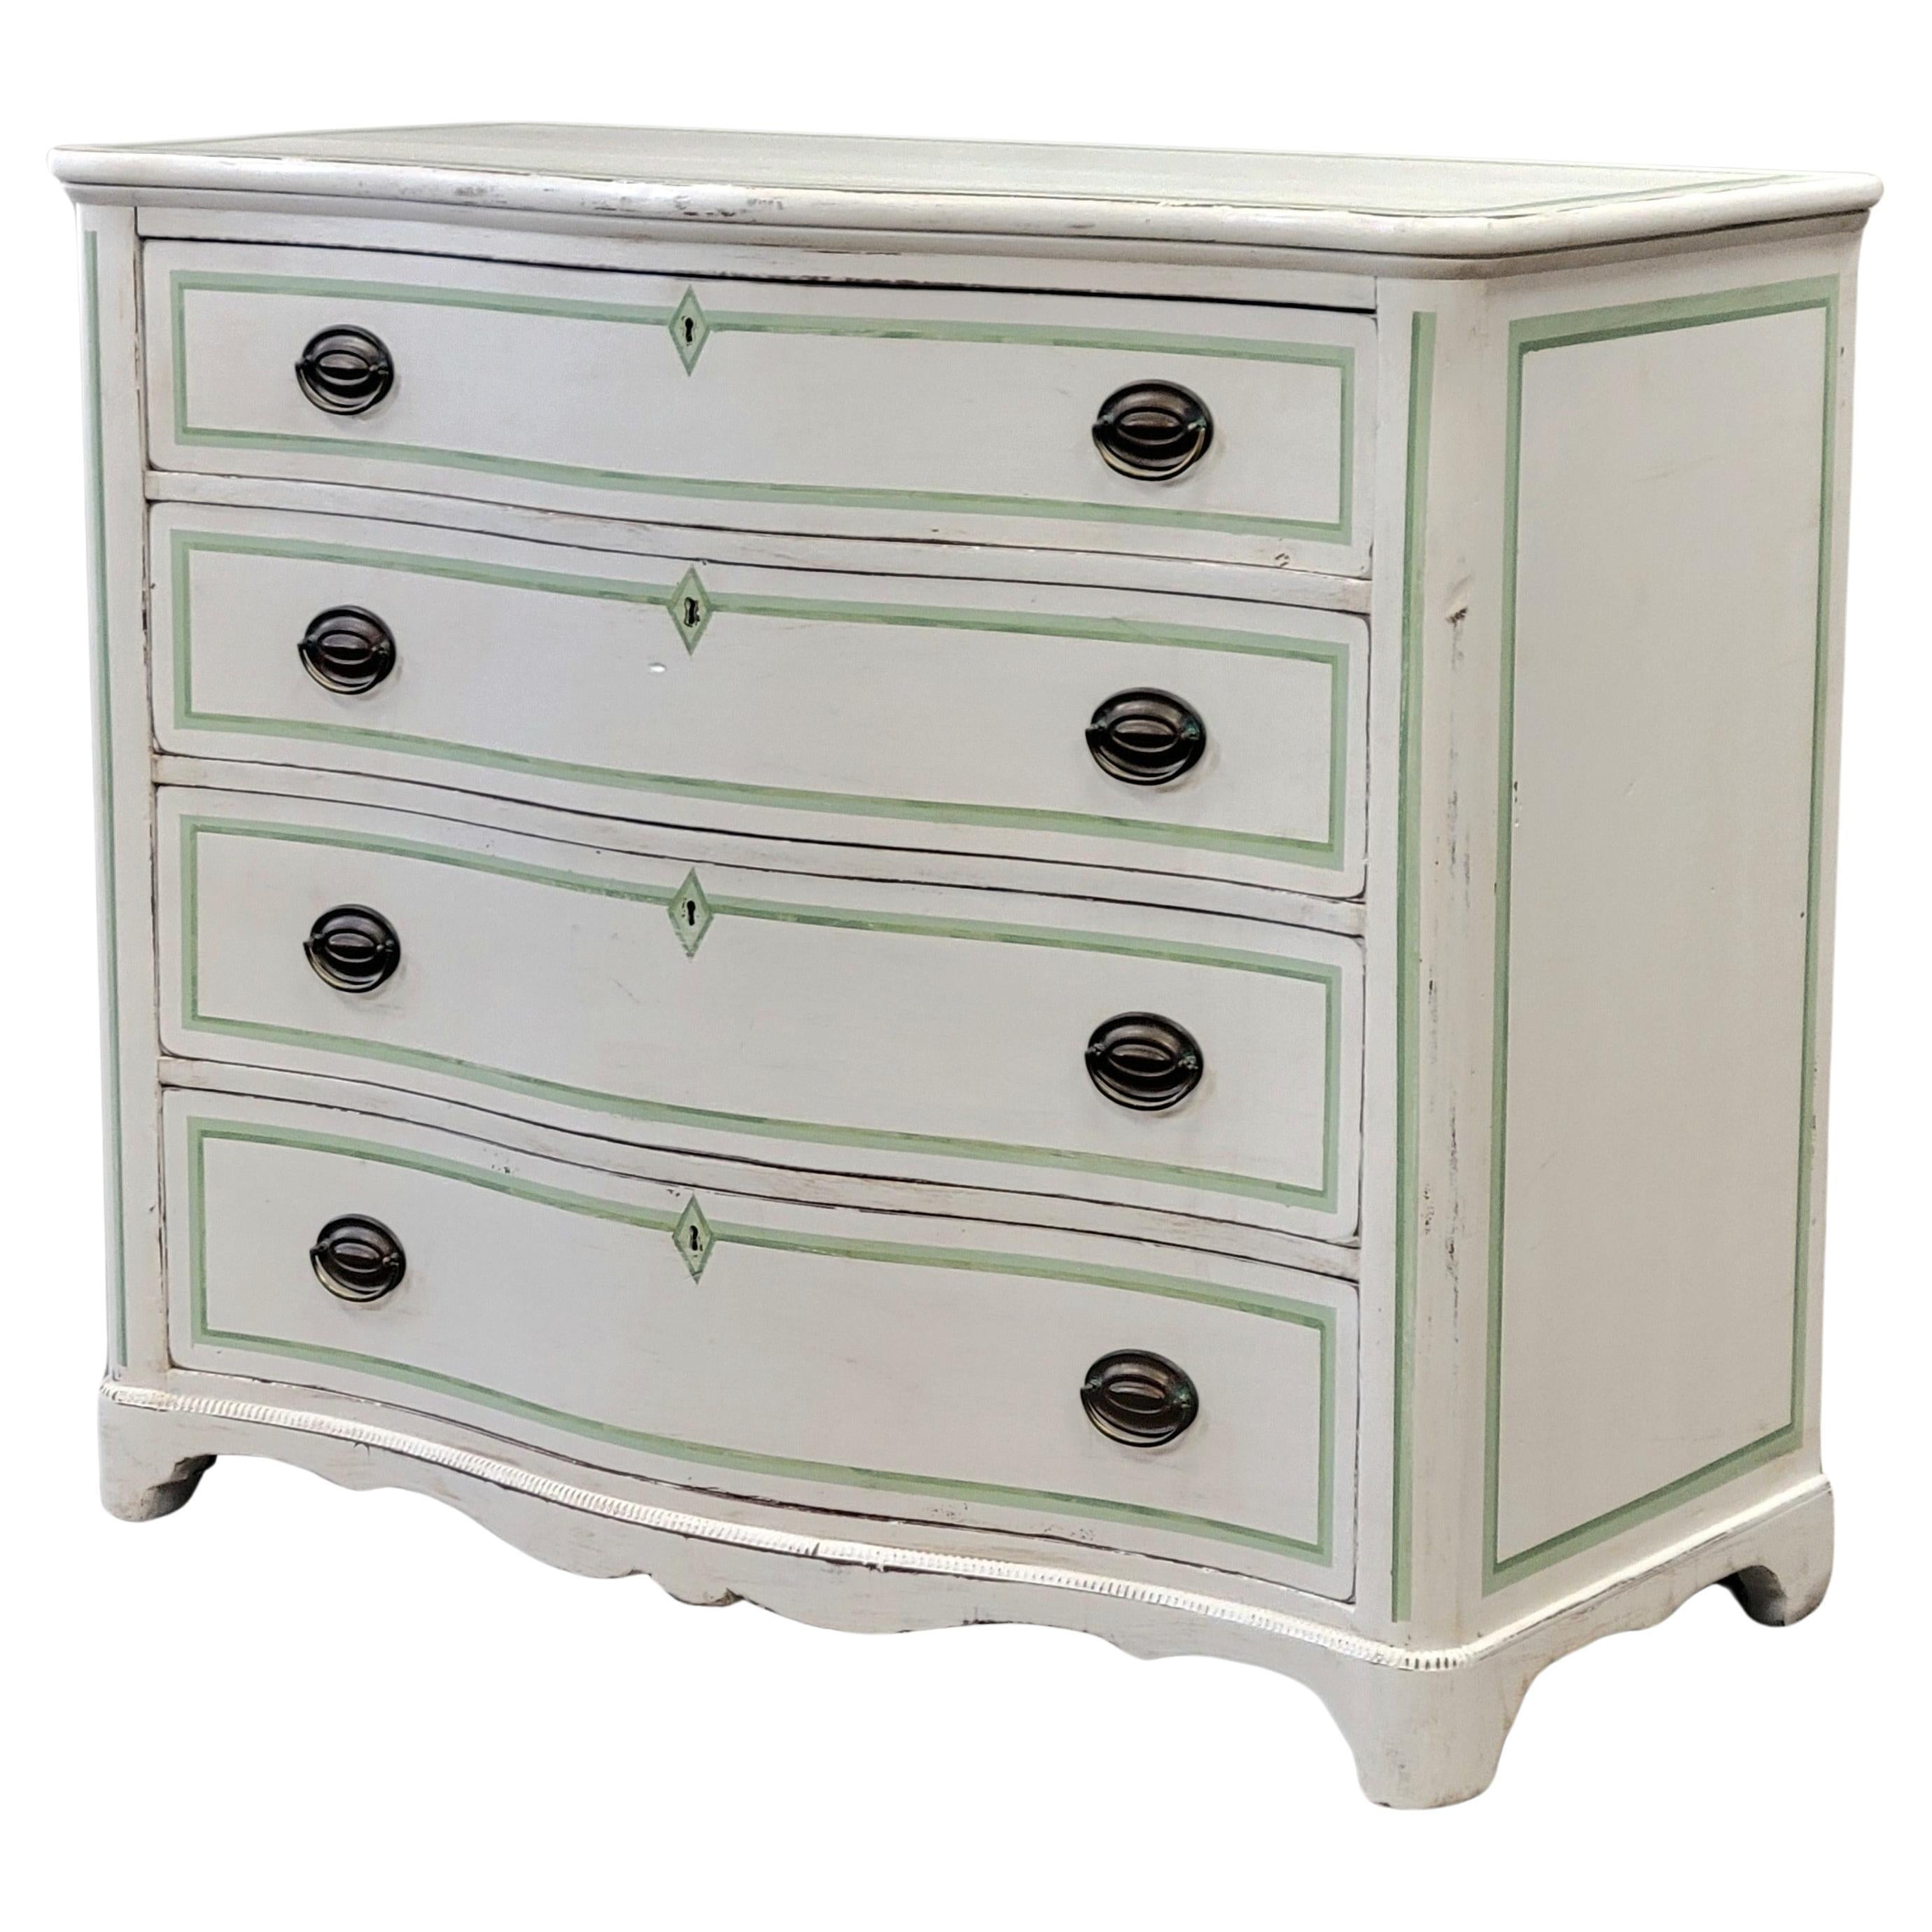 Antique Serpentine Front Dresser Painted White With Green French Line Motif For Sale